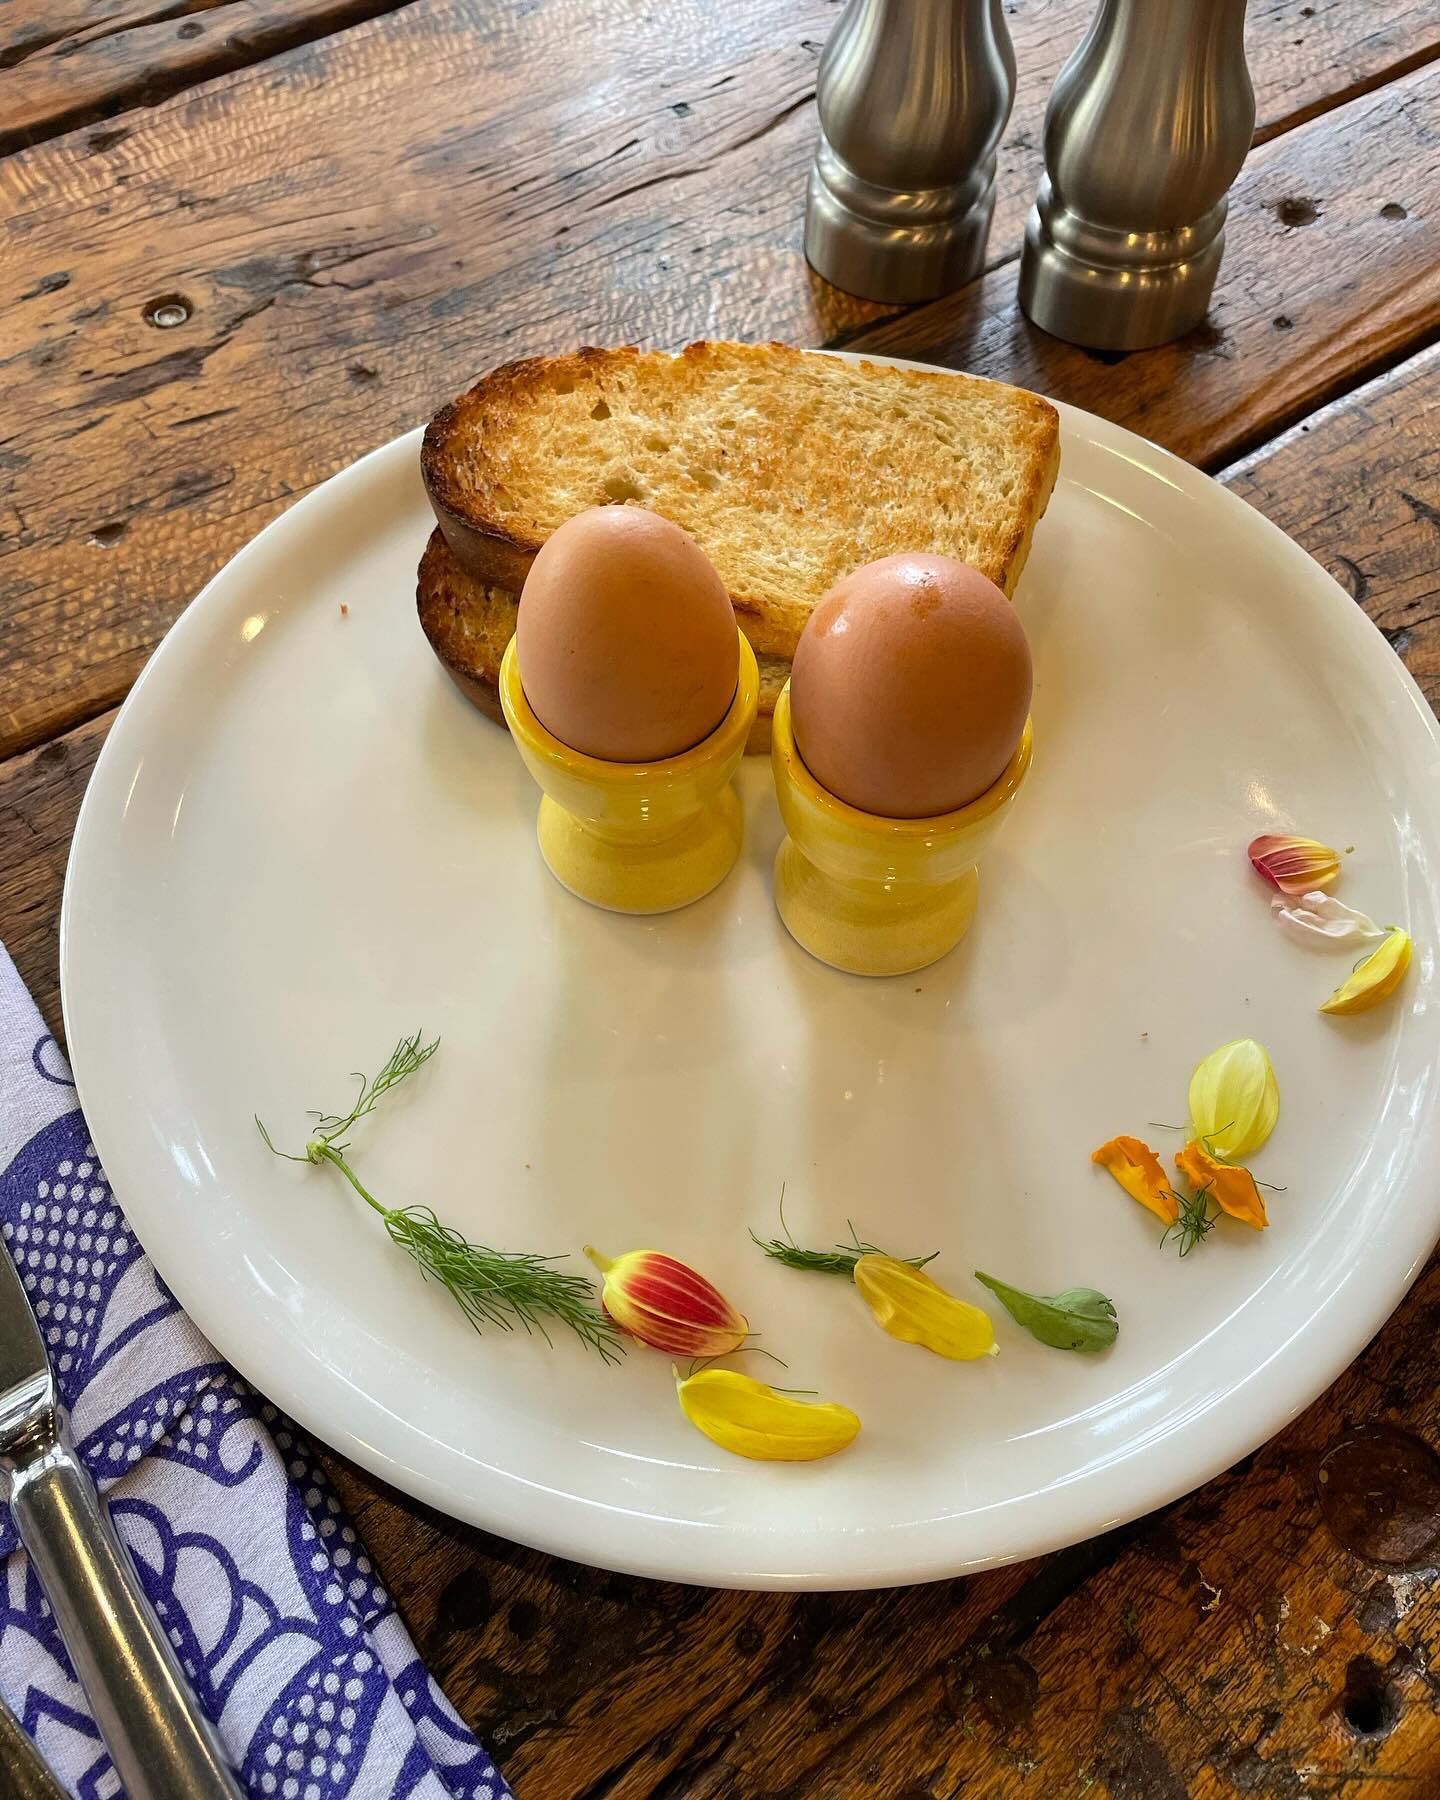 Starting the day with eggs fresh from the farm. Our chickens spend at least 6 hours a day free range all over the farm. Busy on pest control duty through the vegetables. #freerange #farmfresheggs #farmfresh #farmtotable #farmtofork #breakfast #eggs